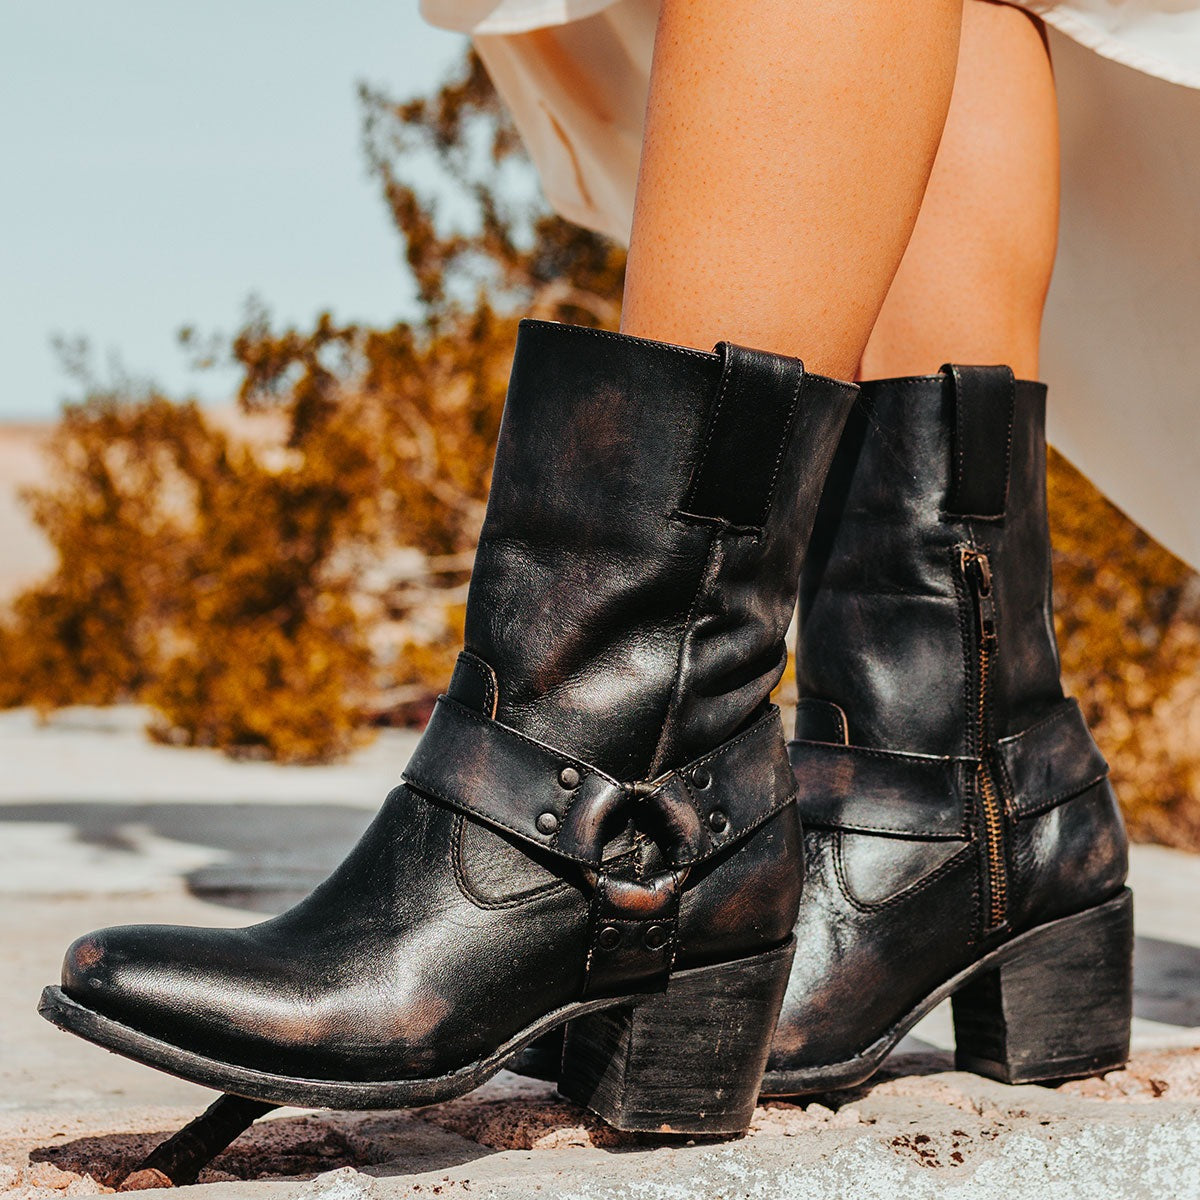 FREEBIRD women's Darcy black leather boot with a studded ankle harness, leather pull straps, an inside zip closure and a square toe